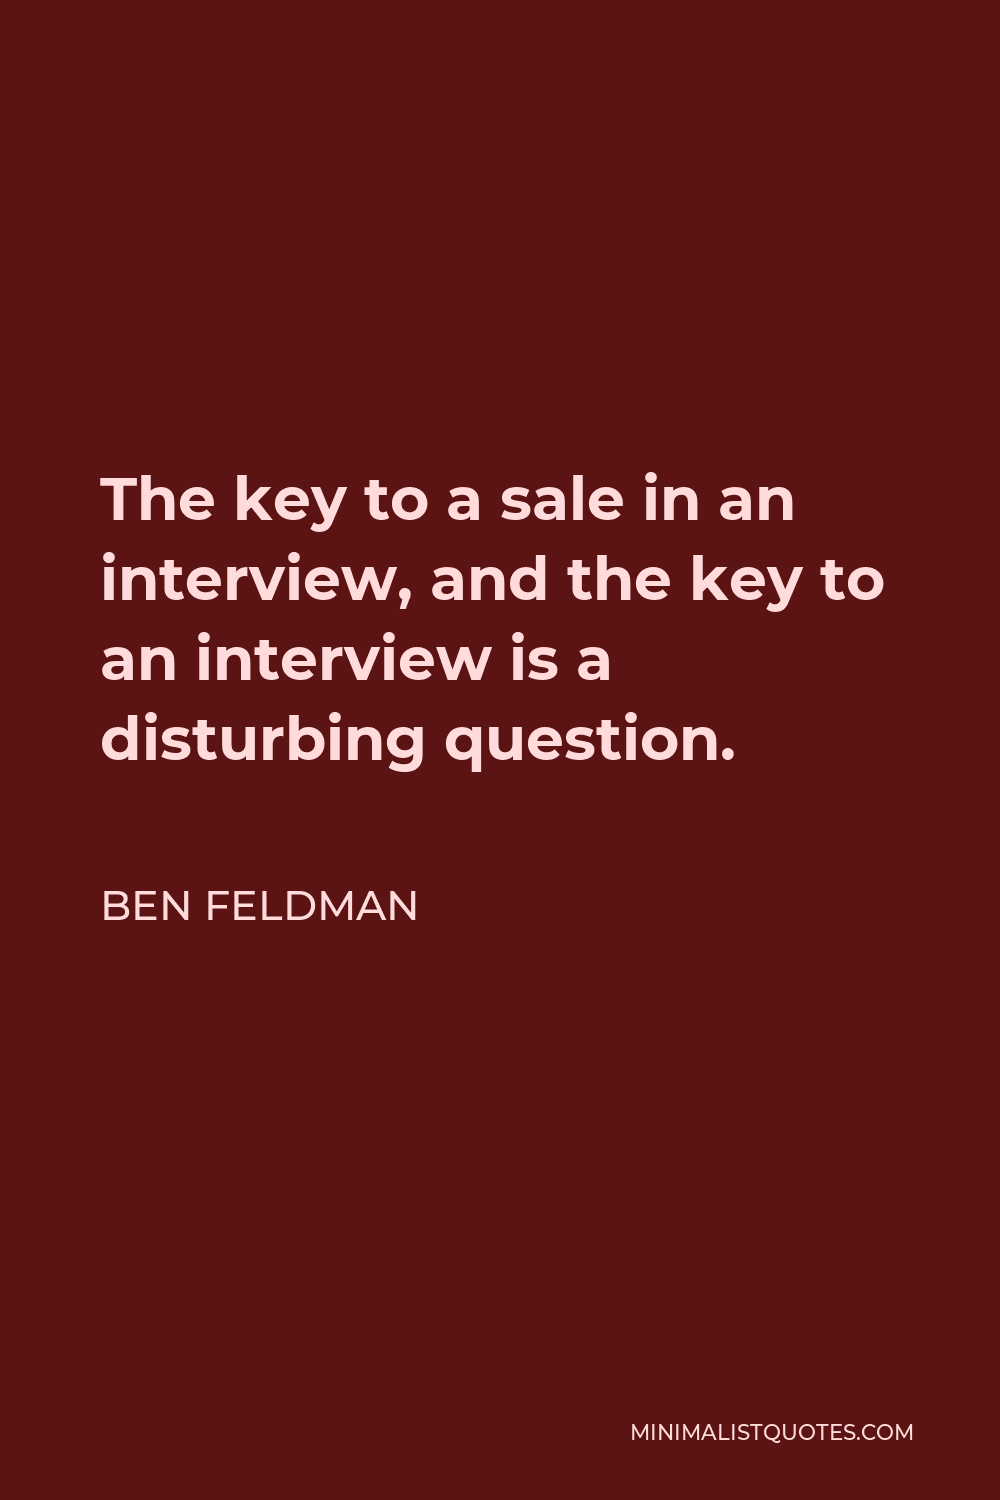 Ben Feldman Quote - The key to a sale in an interview, and the key to an interview is a disturbing question.